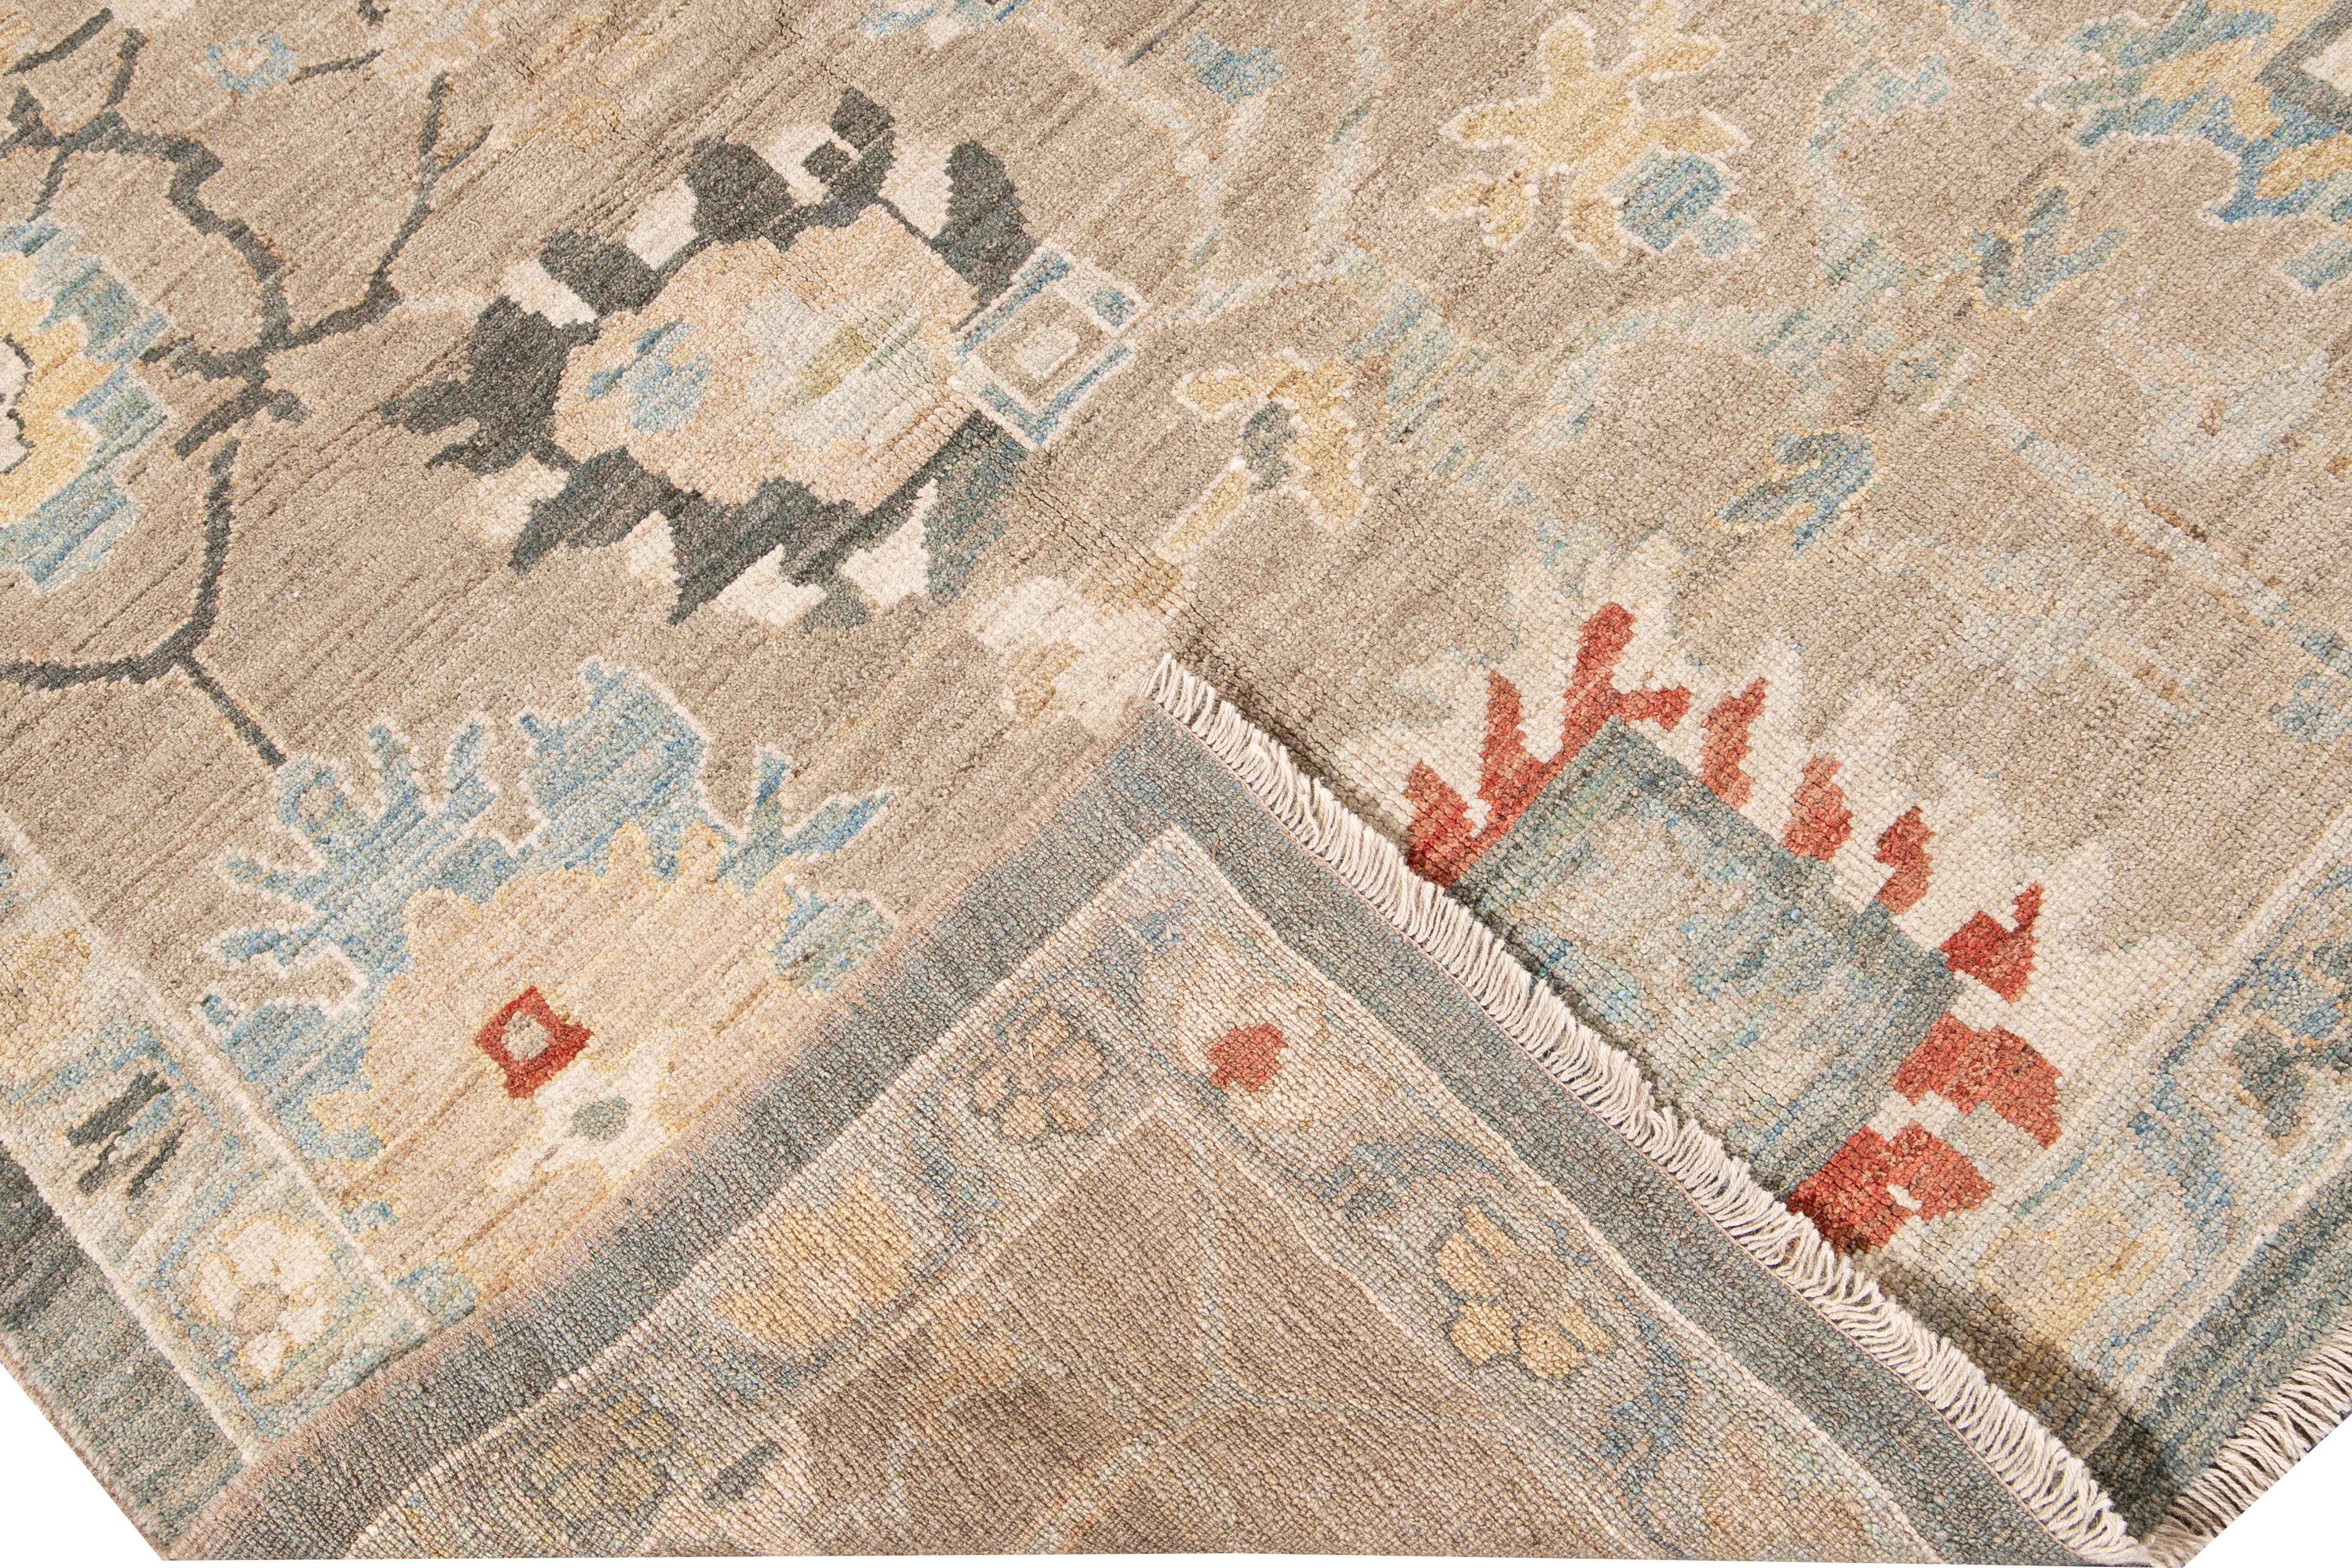 Beautiful modern Sultanabad hand-knotted wool rug with a nude field. This Sultanabad rug has Ivory, yellow, blue, green, and orange accents in a gorgeous all-over geometric floral design.

This rug measures: 9' x 12'1